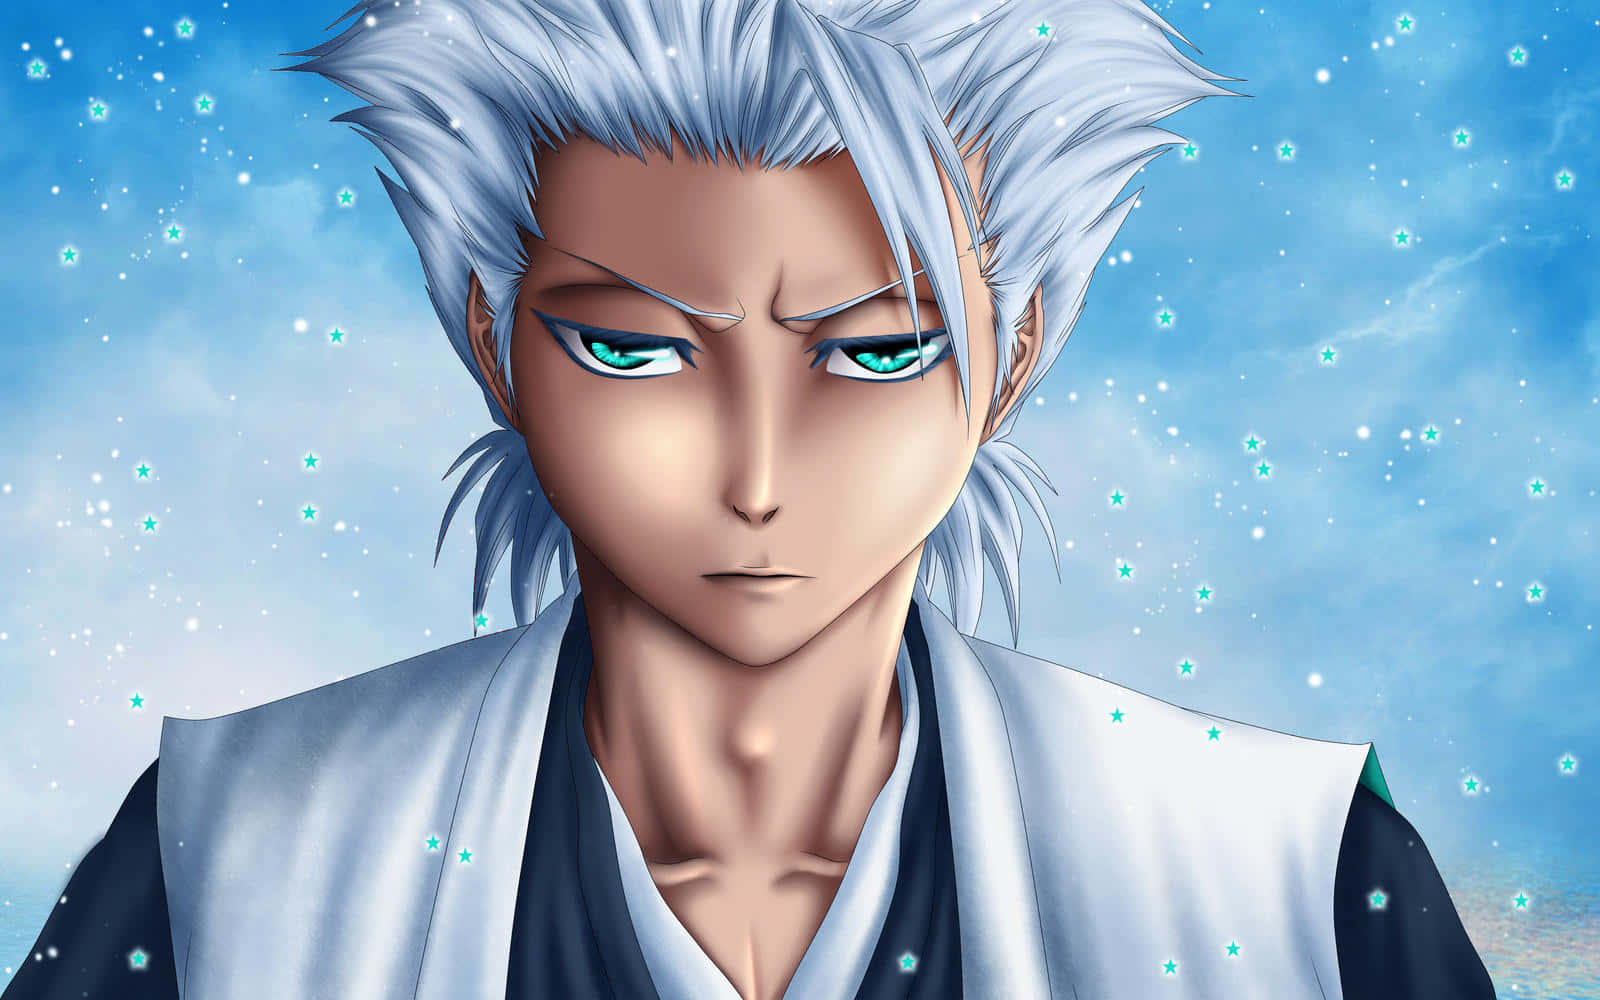 Toshiro Hitsugaya, A Brave And Powerful Leader From The World Of Bleach. Background